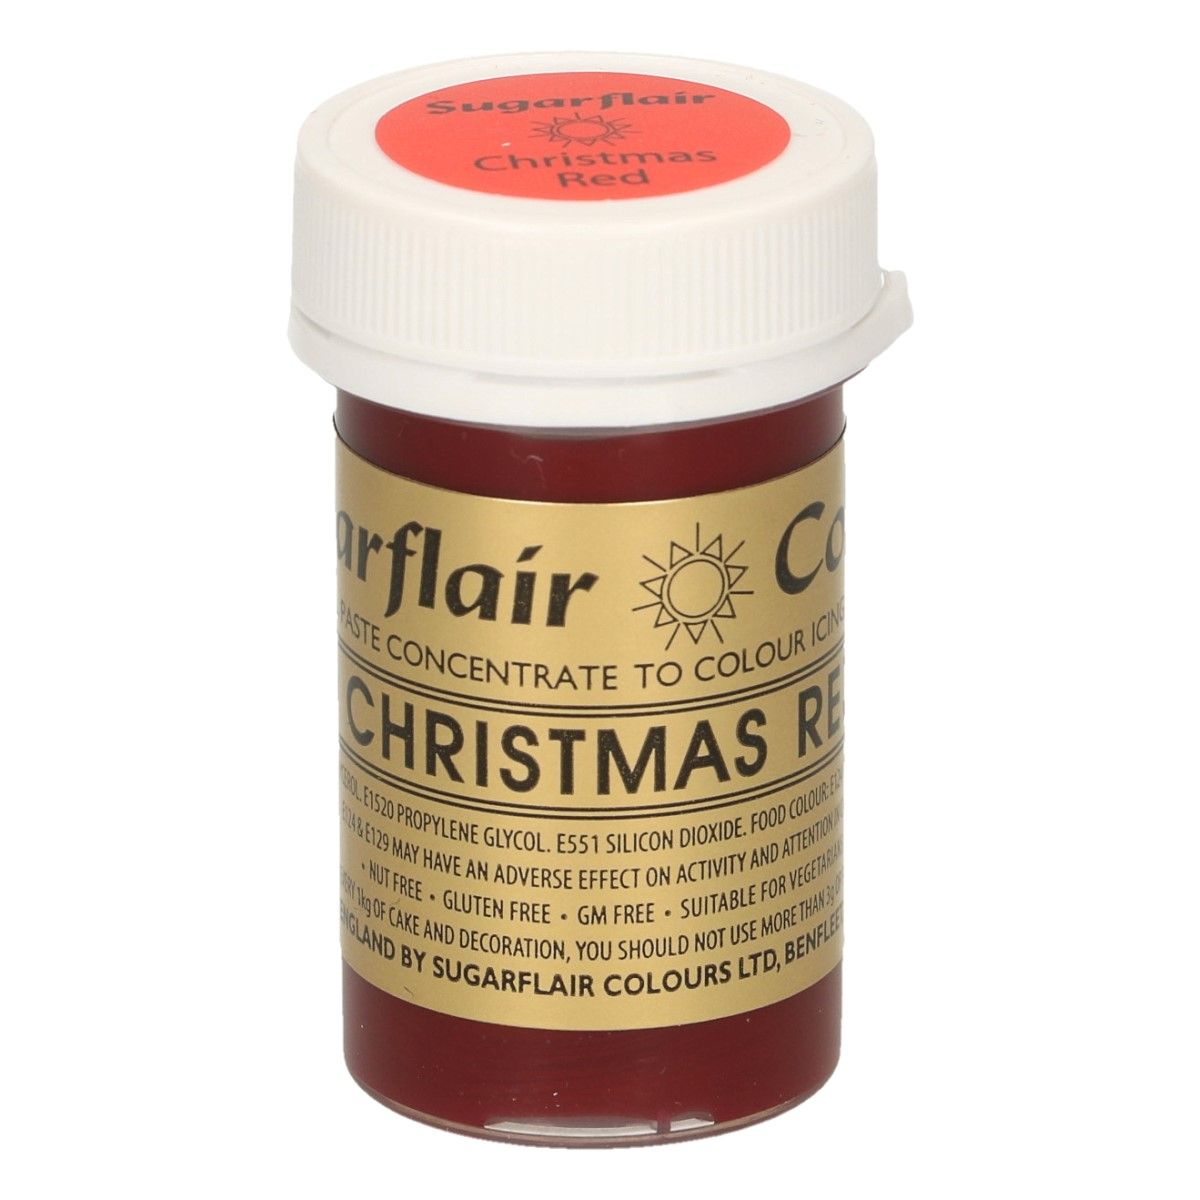 Pastenfarbe Christmas Red-Weihnachtsrot 25g